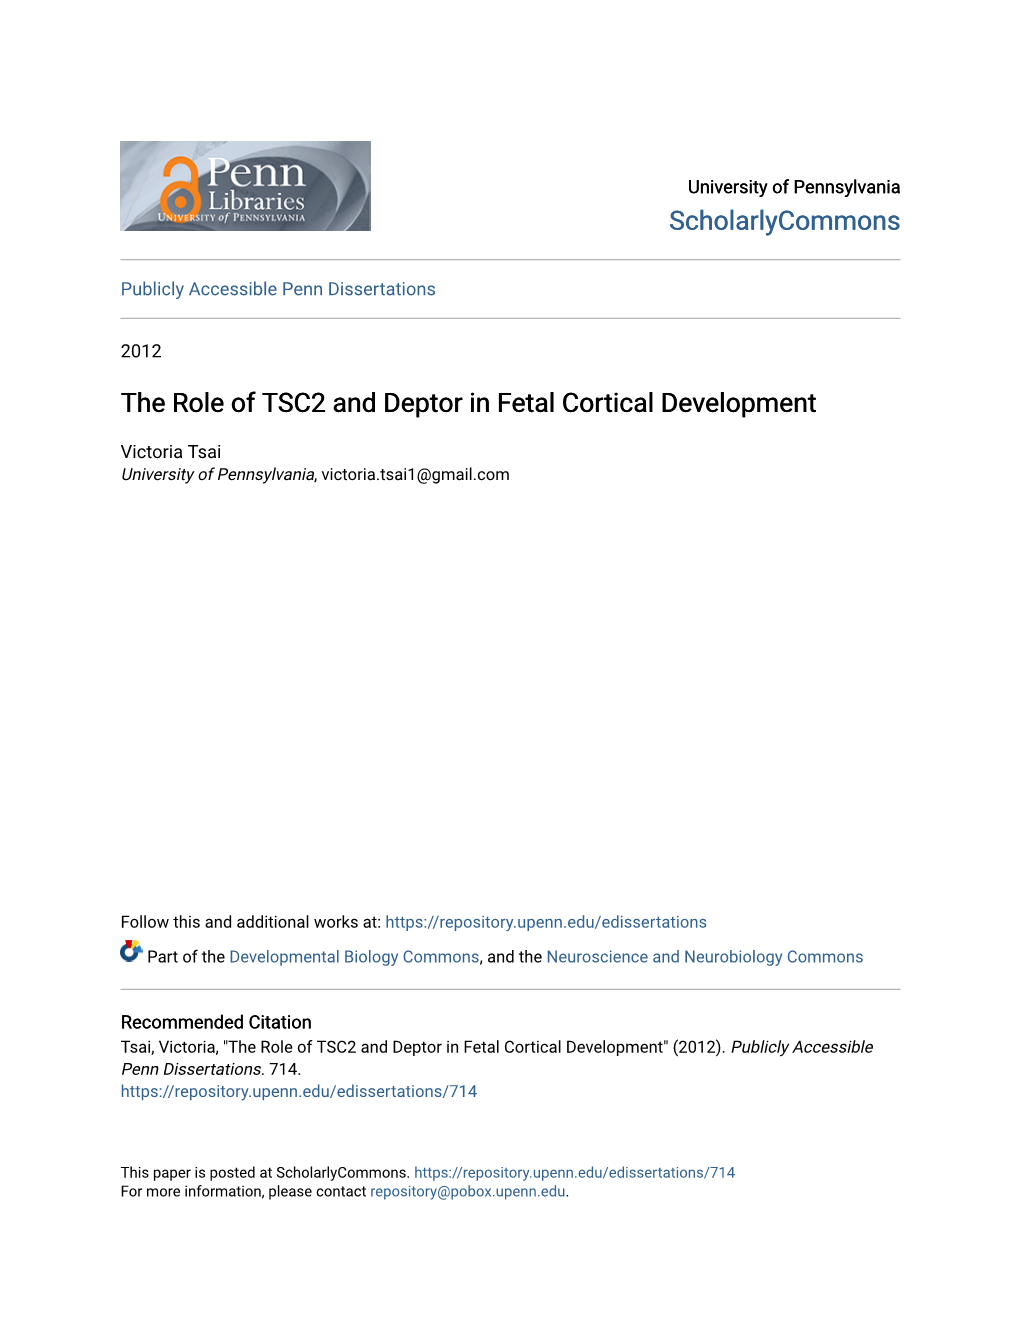 The Role of TSC2 and Deptor in Fetal Cortical Development